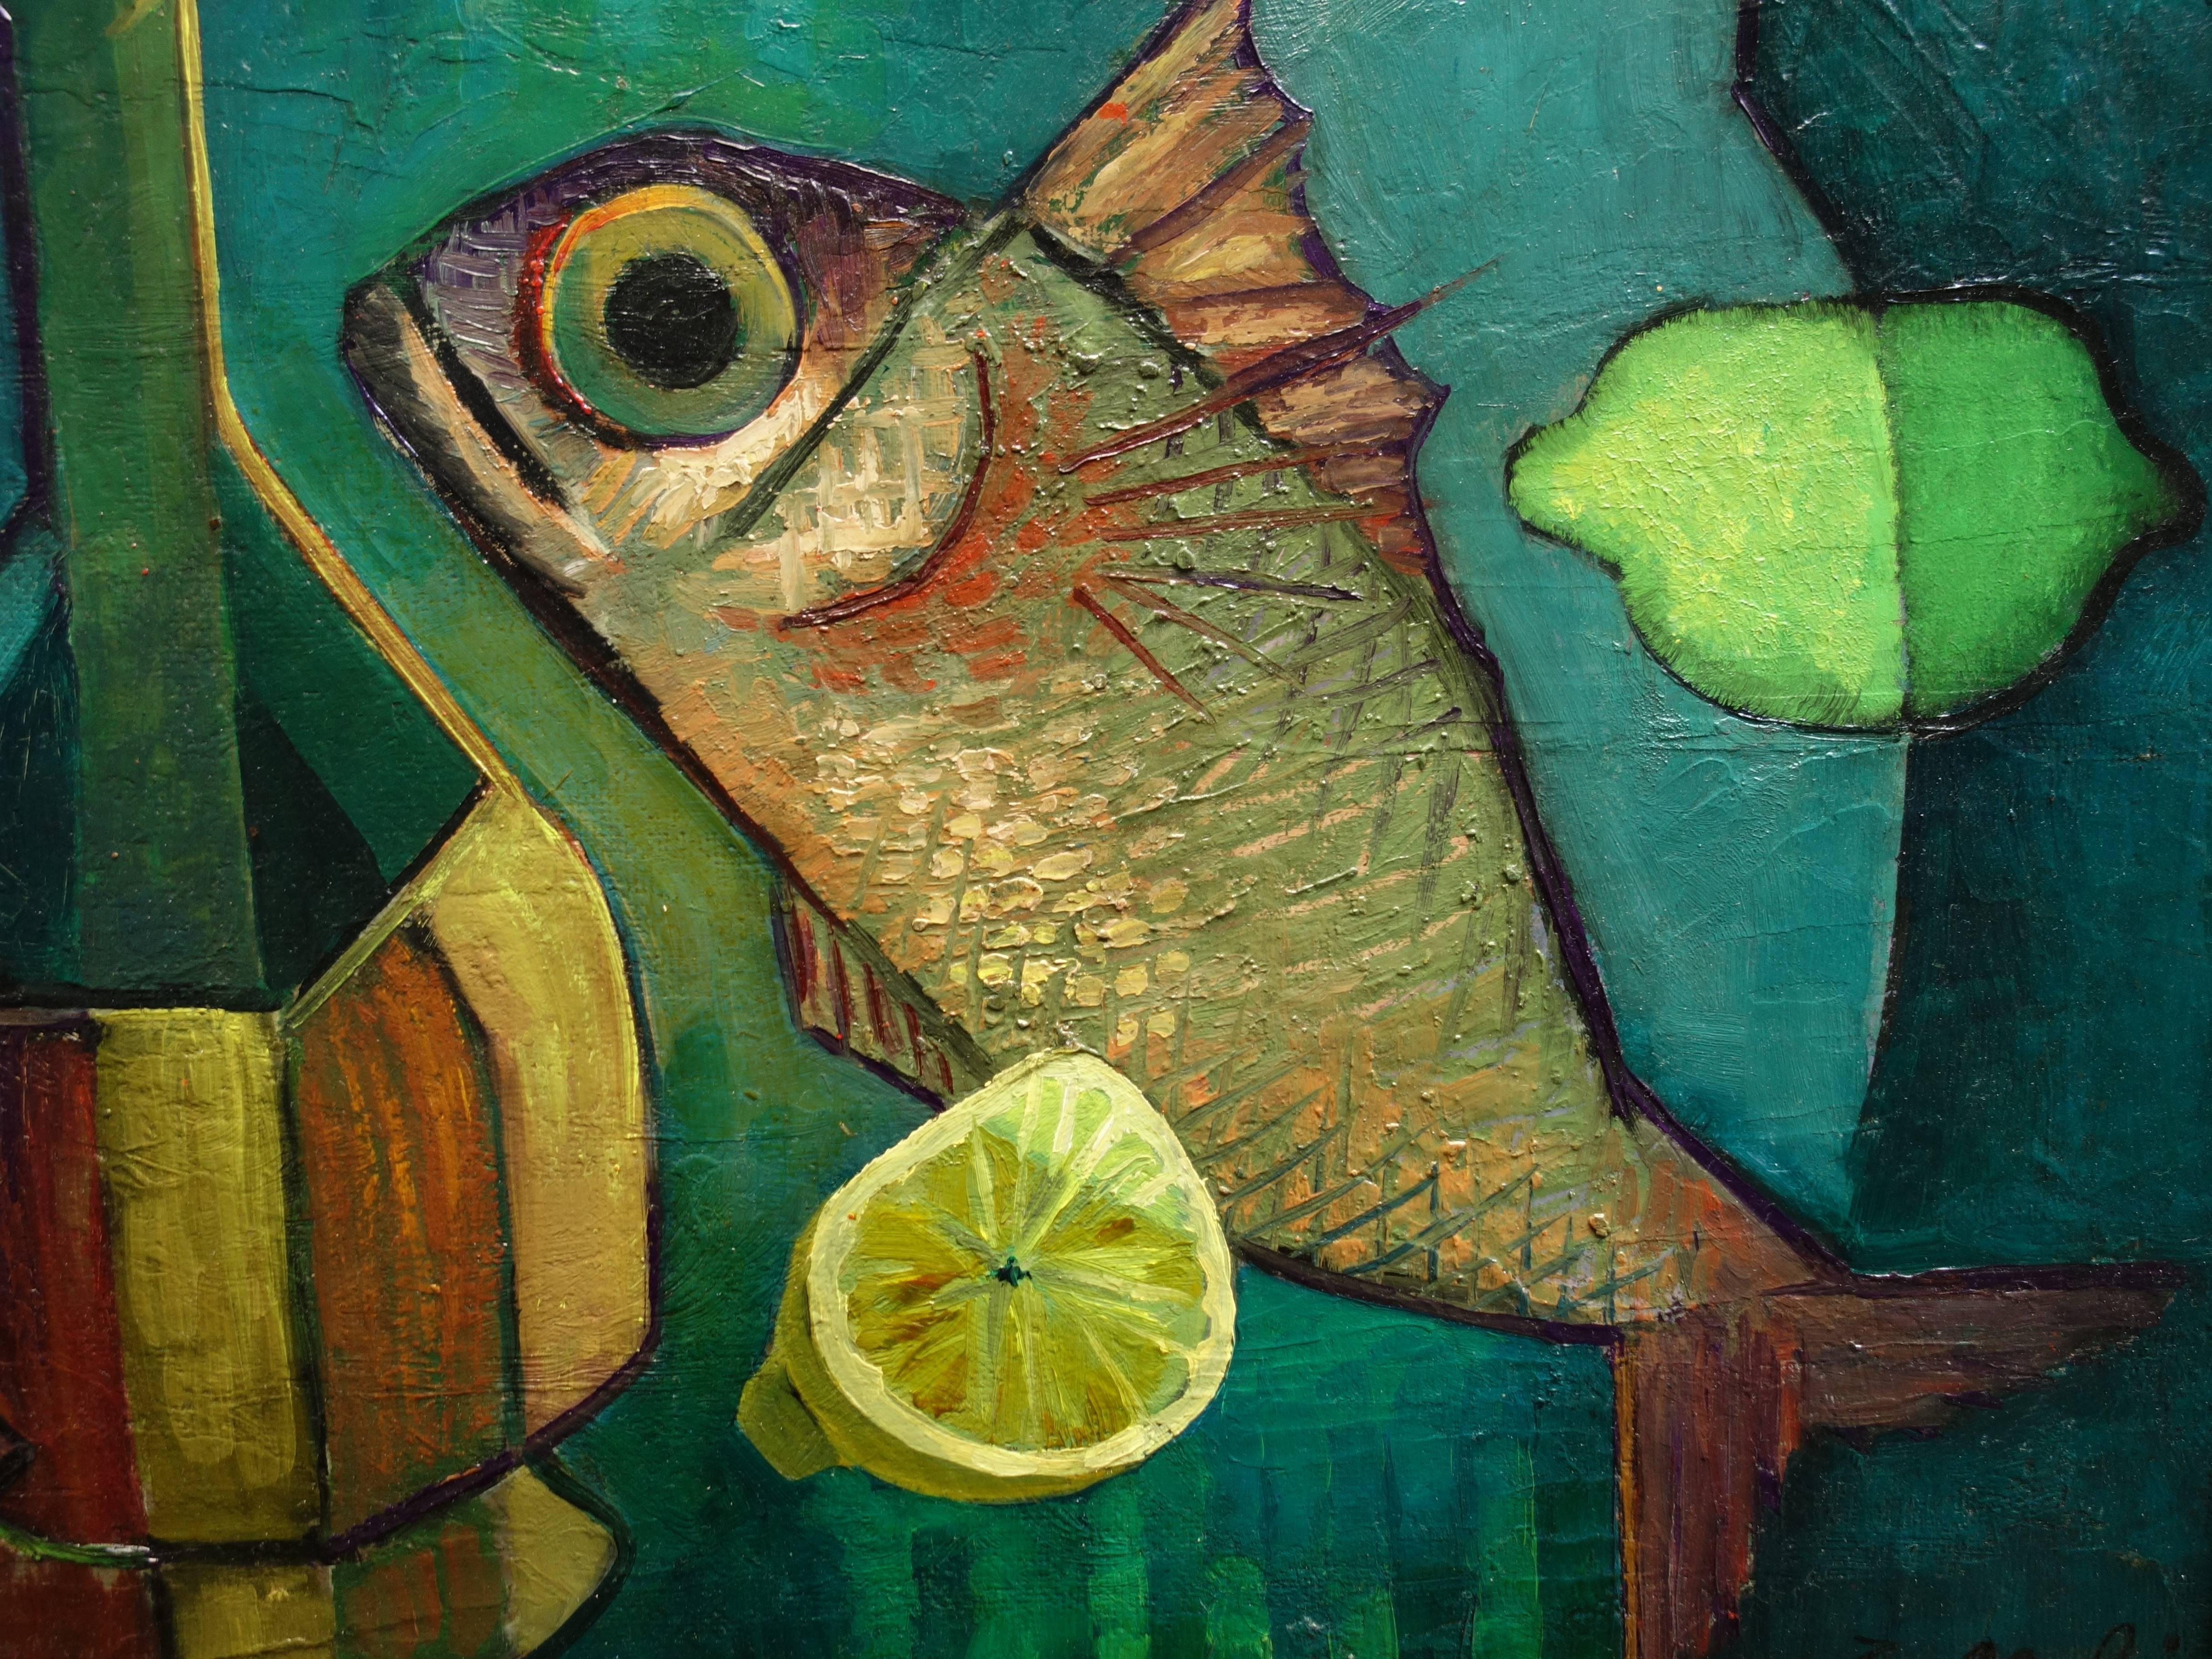 Fish and Bottle - Original oil painting - Signed - Black Animal Painting by Louis Toffoli